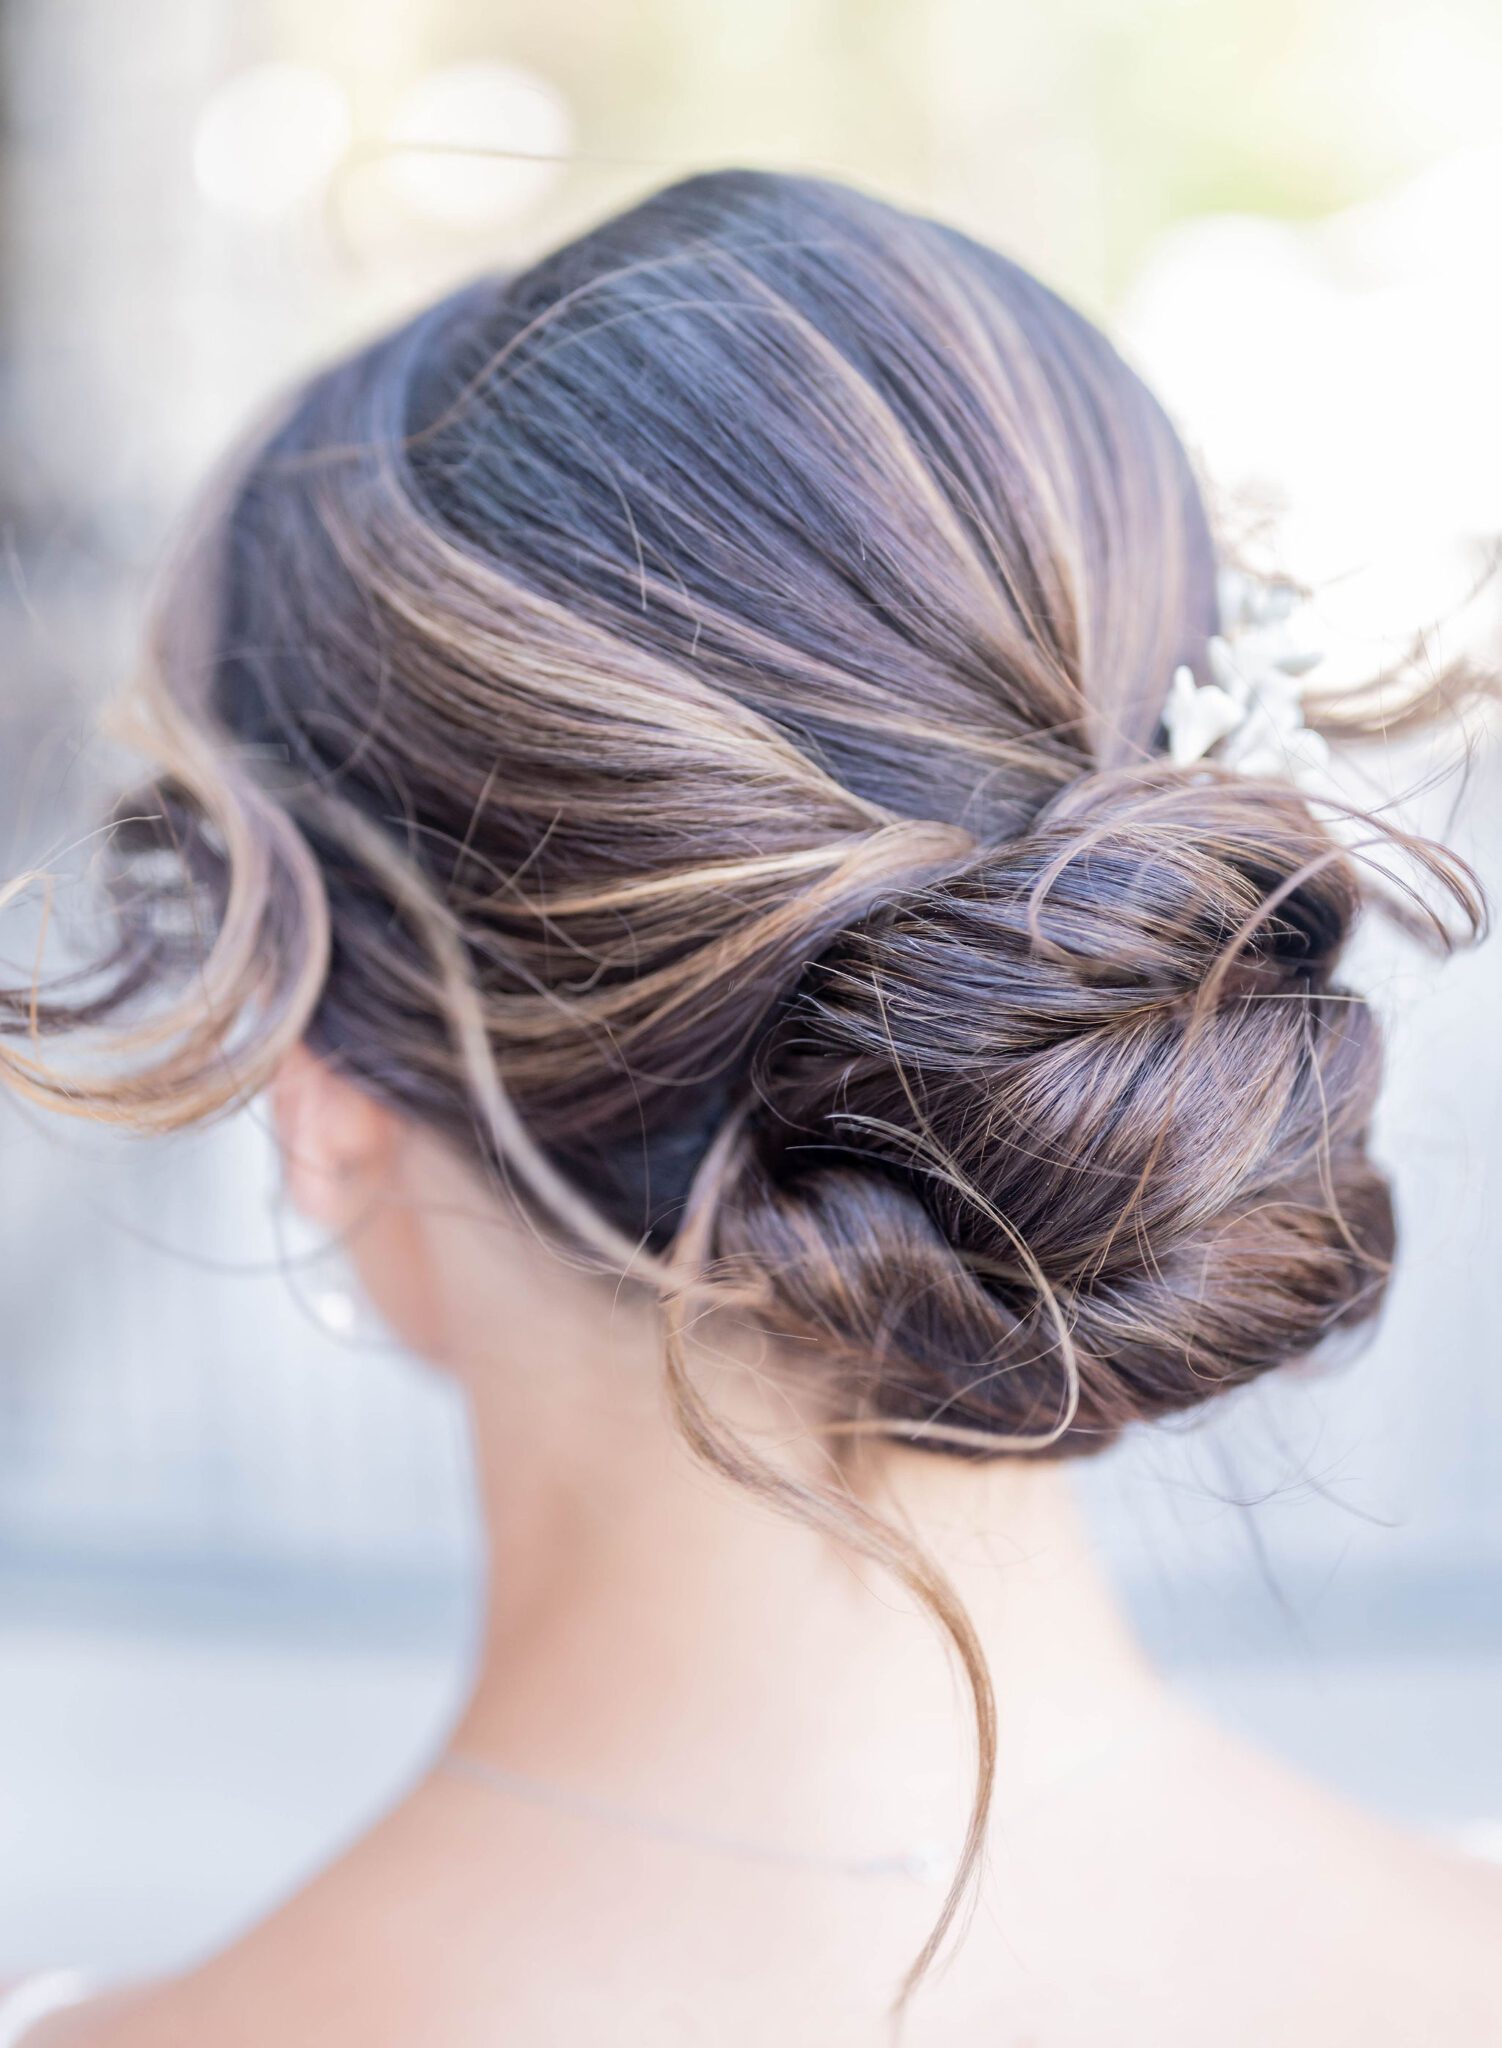 Elegant updo hairstyle for classy wedding style at the Fairmont Banff Springs. 